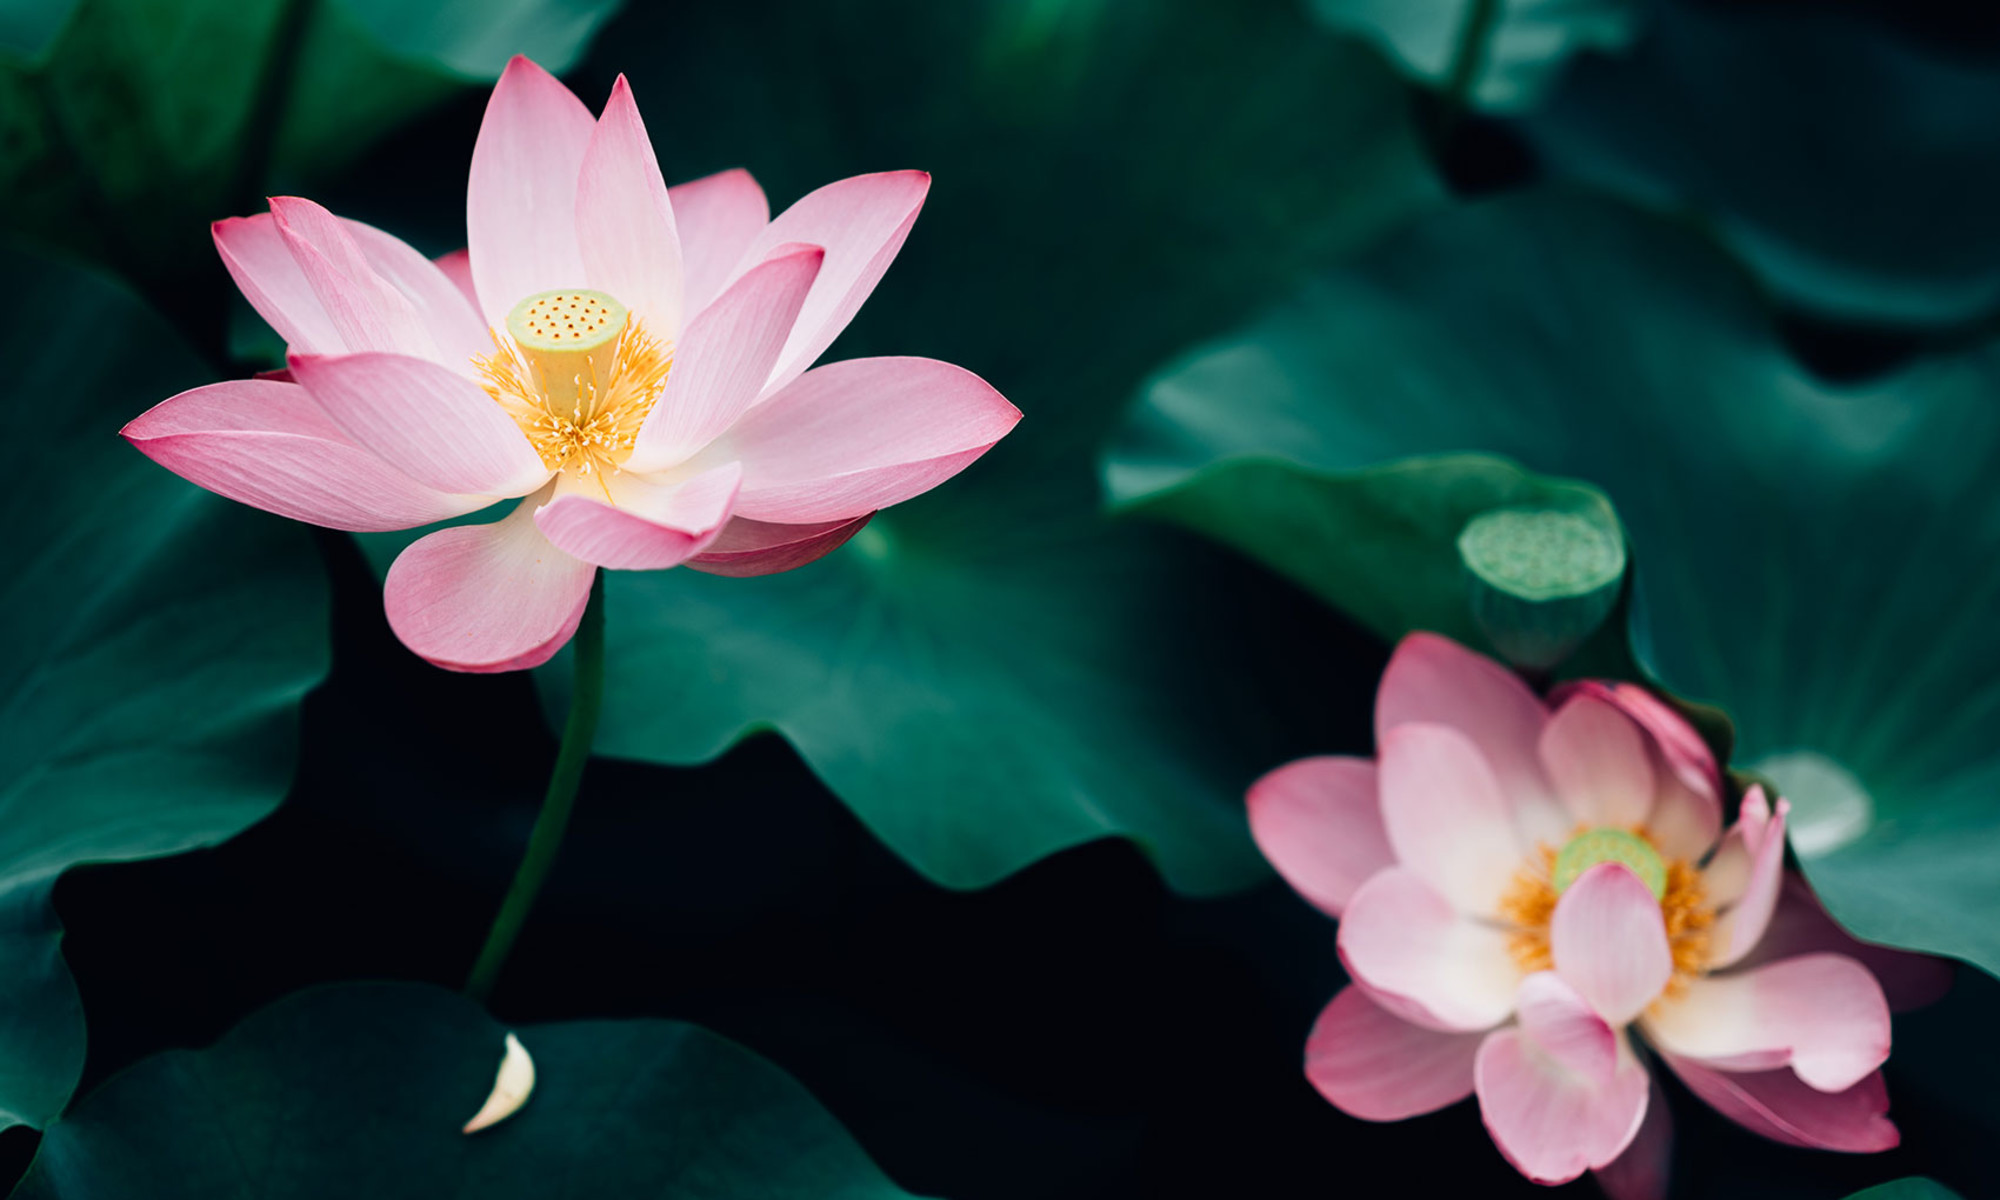 lotus flowers: the history, symbolism & meaning of this flower